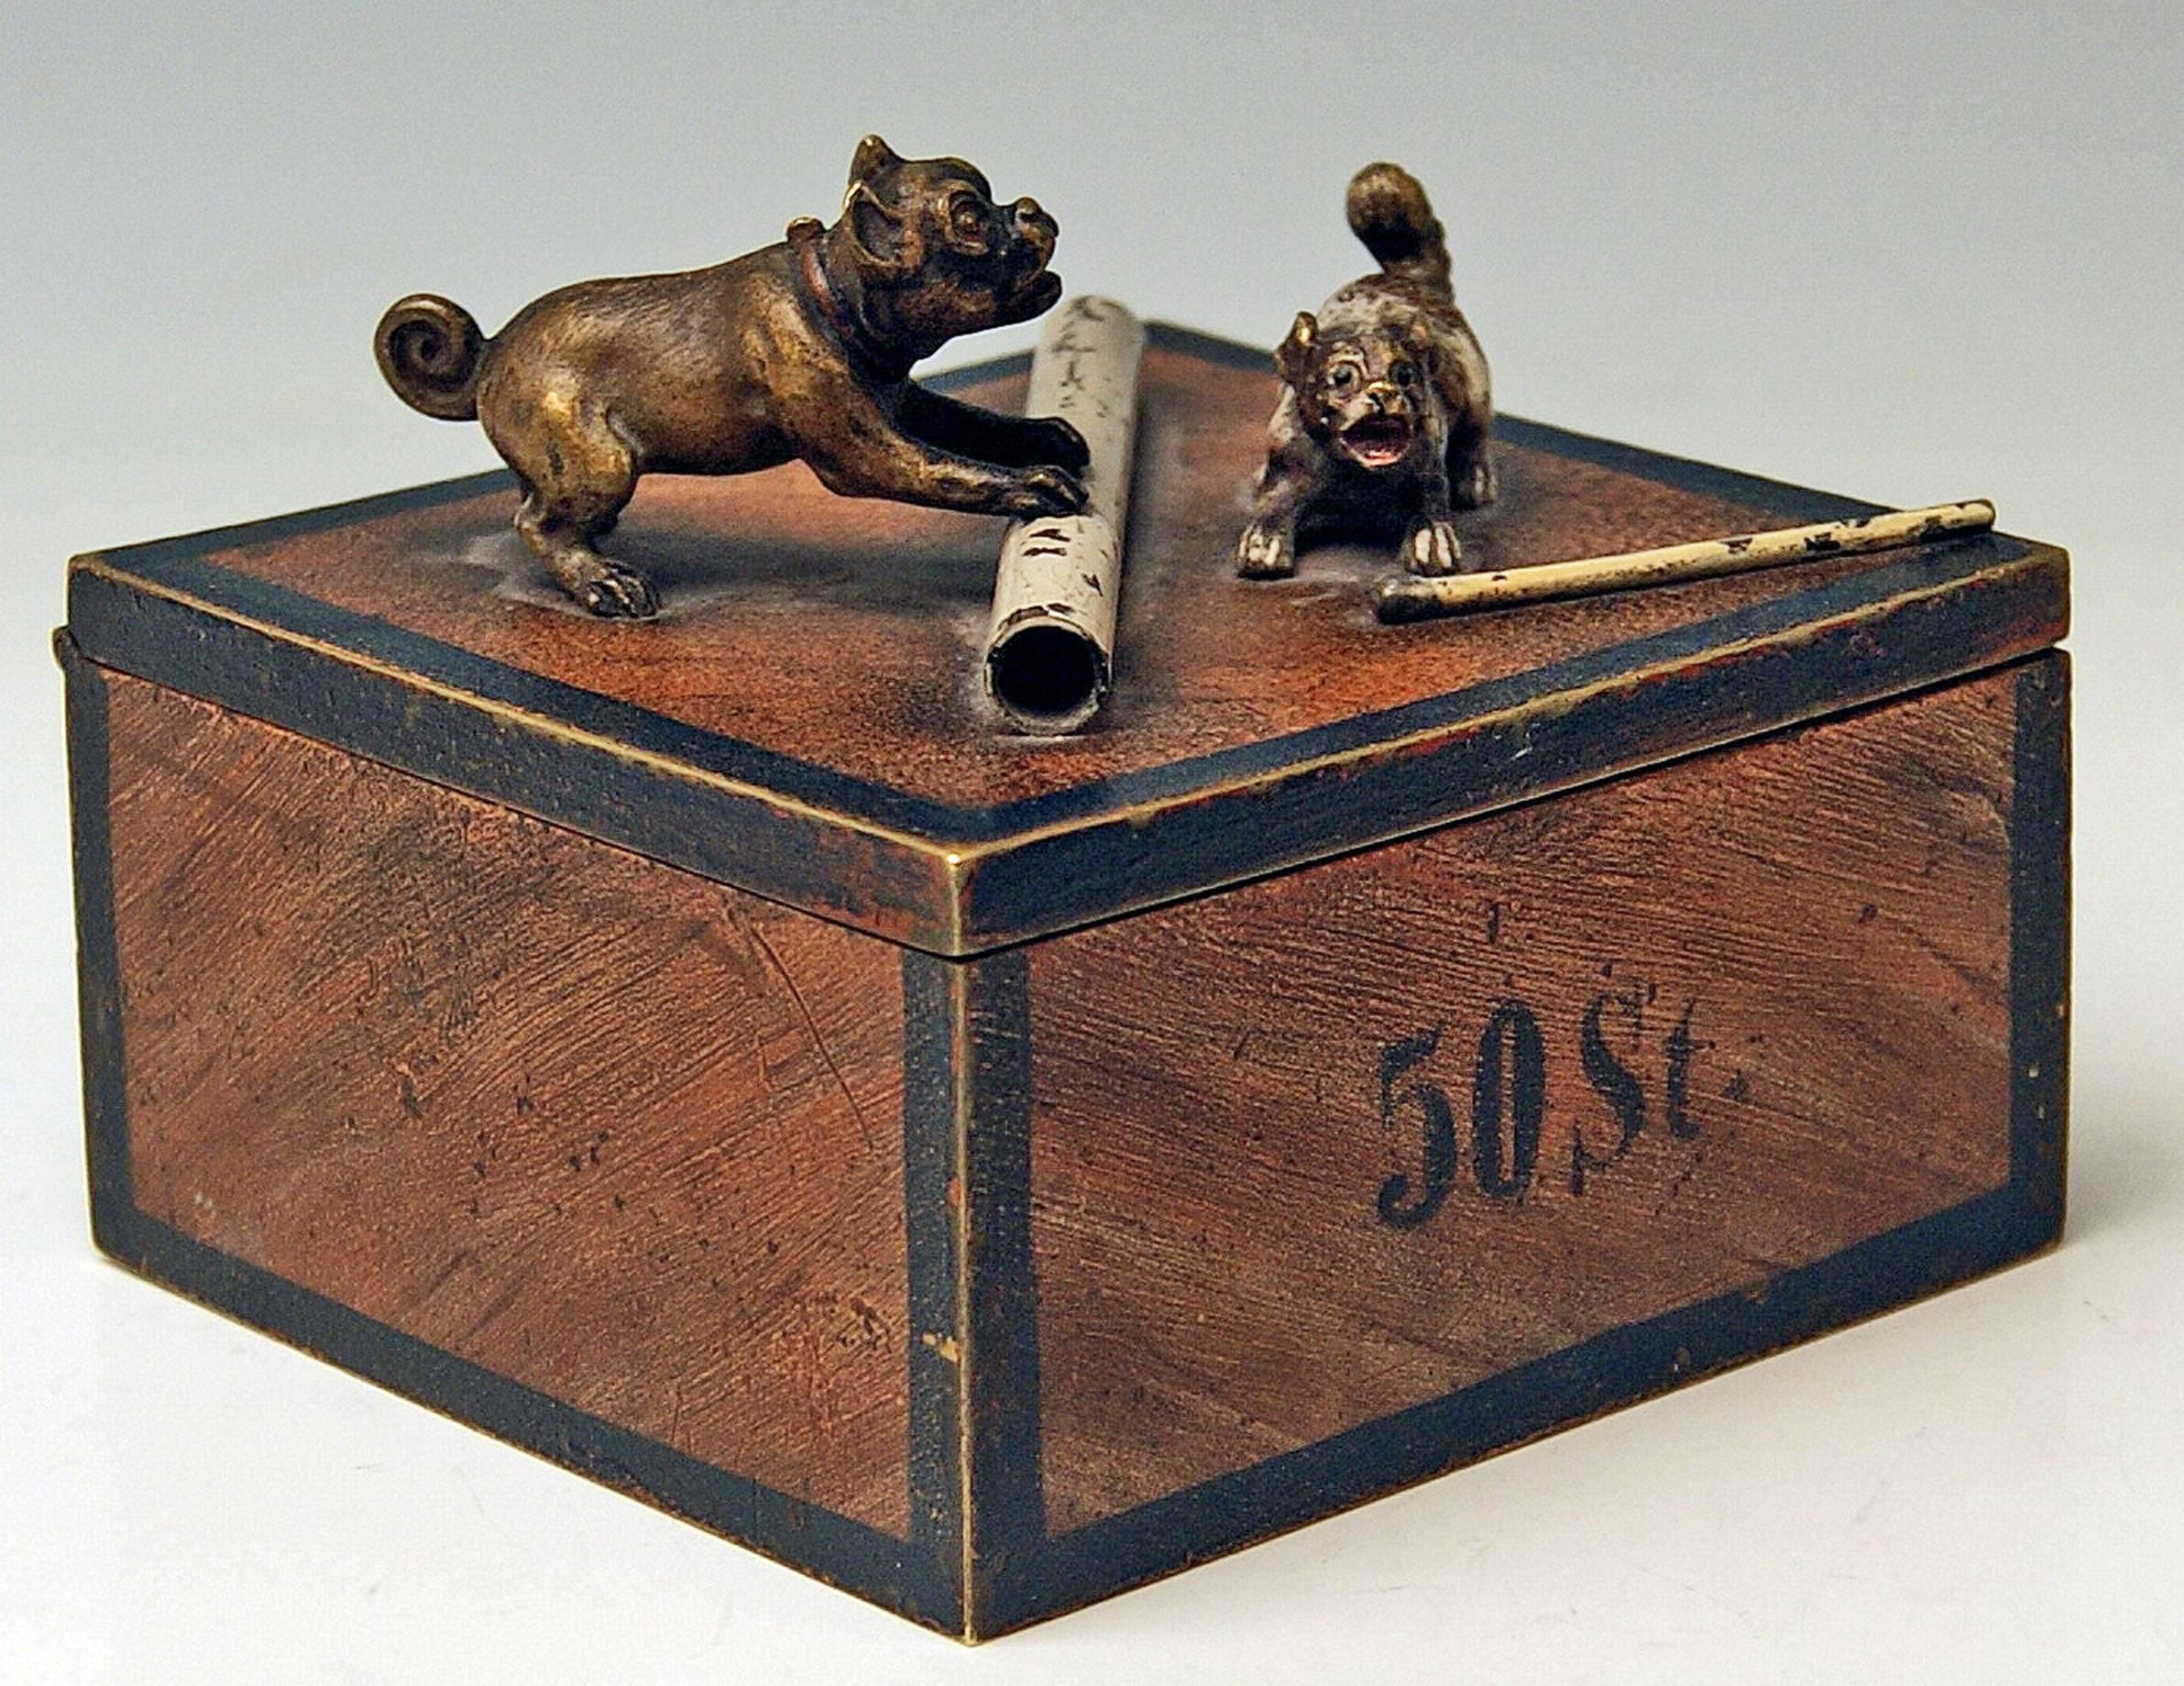 Gorgeous Vienna bronze tobacco box made by famous manufactory Bergman(n), circa 1890-1900.
The hinged lid of bronze box is decorated with most lovely sculptured dog figurines made of bronze, too - these are pugs playing with a roll as well as with